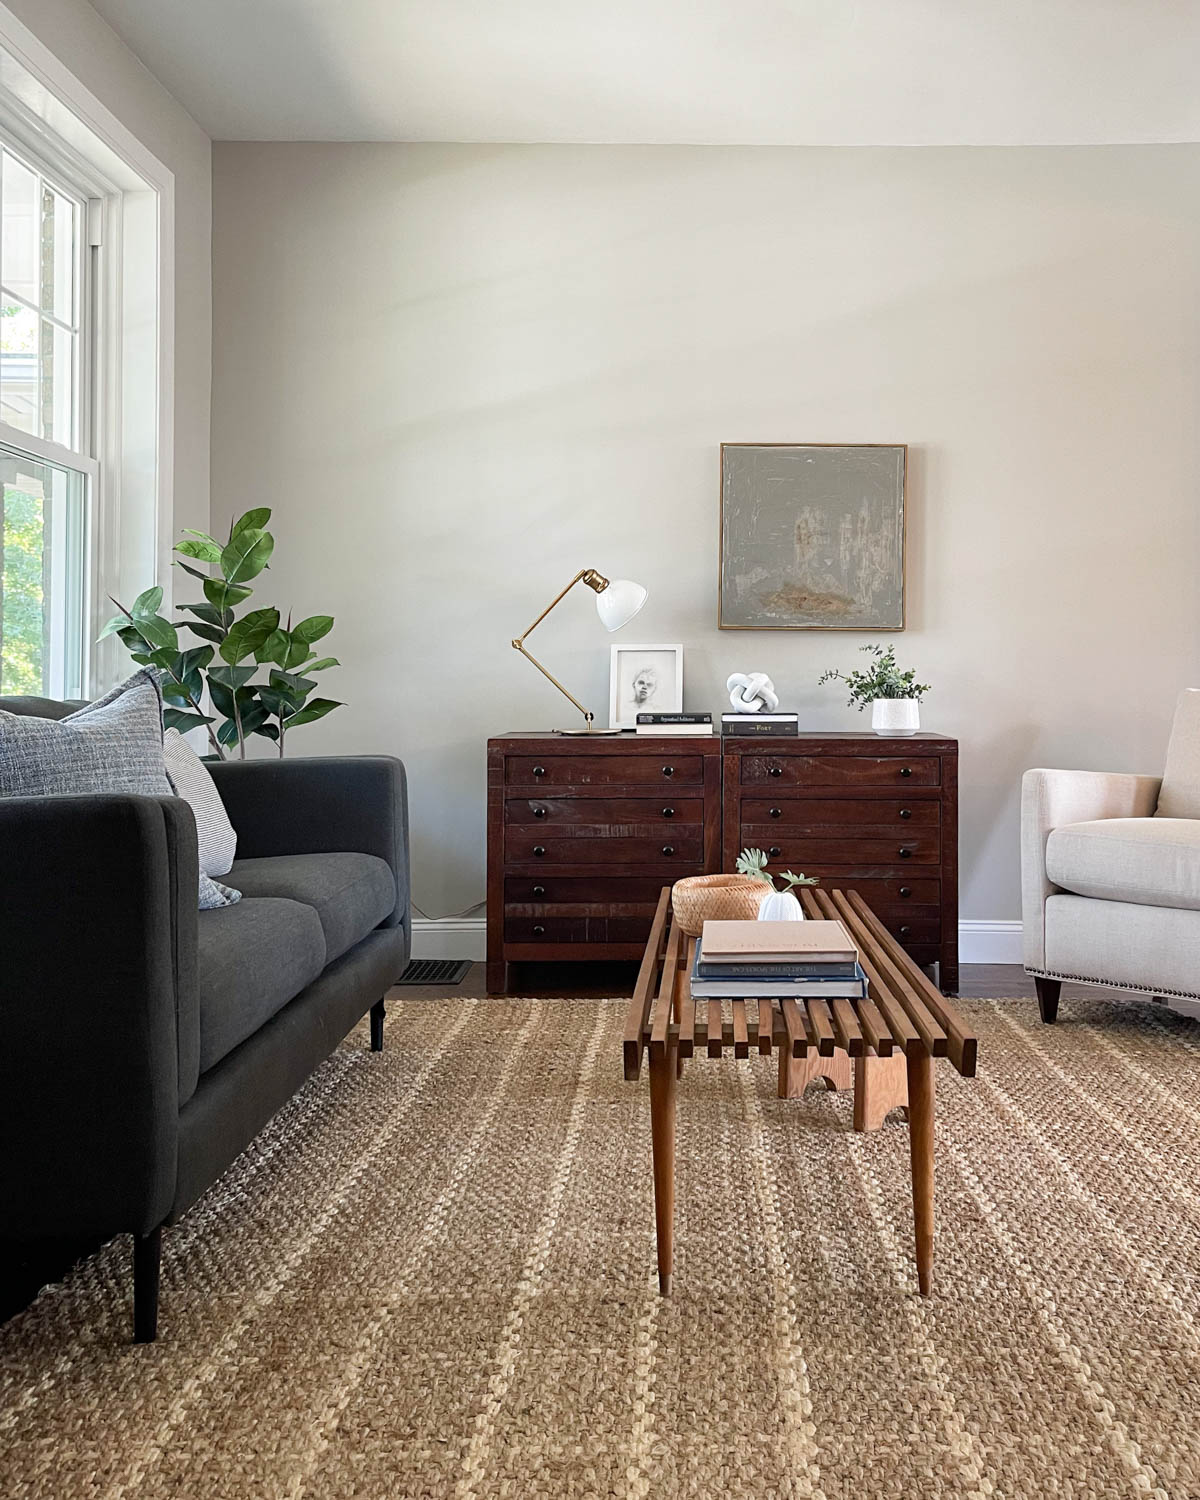 A couch and midcentury coffee table staged in a living area.